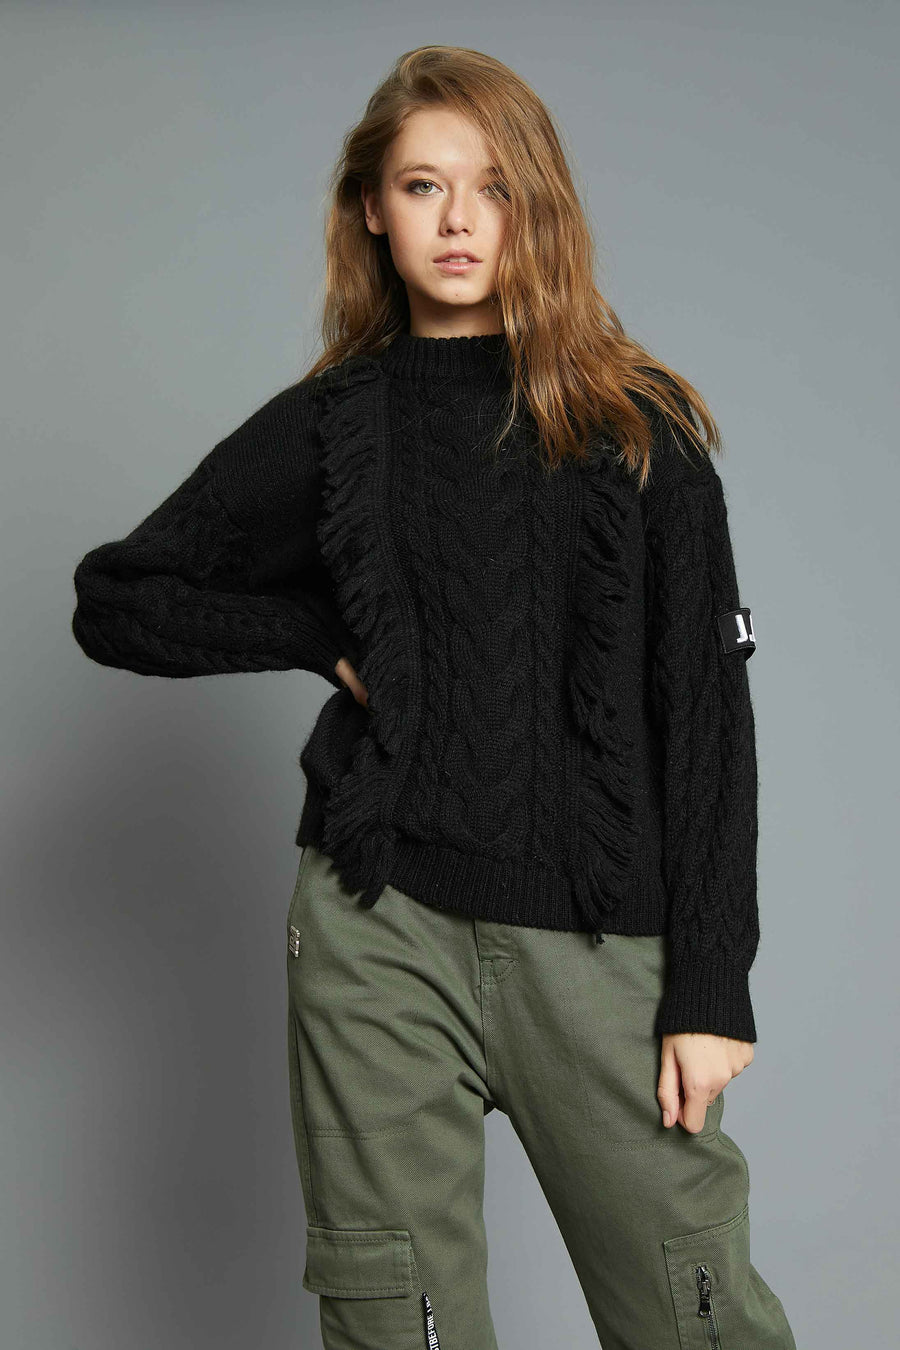 BRAIDED SWEATER AND BLACK FRINGES